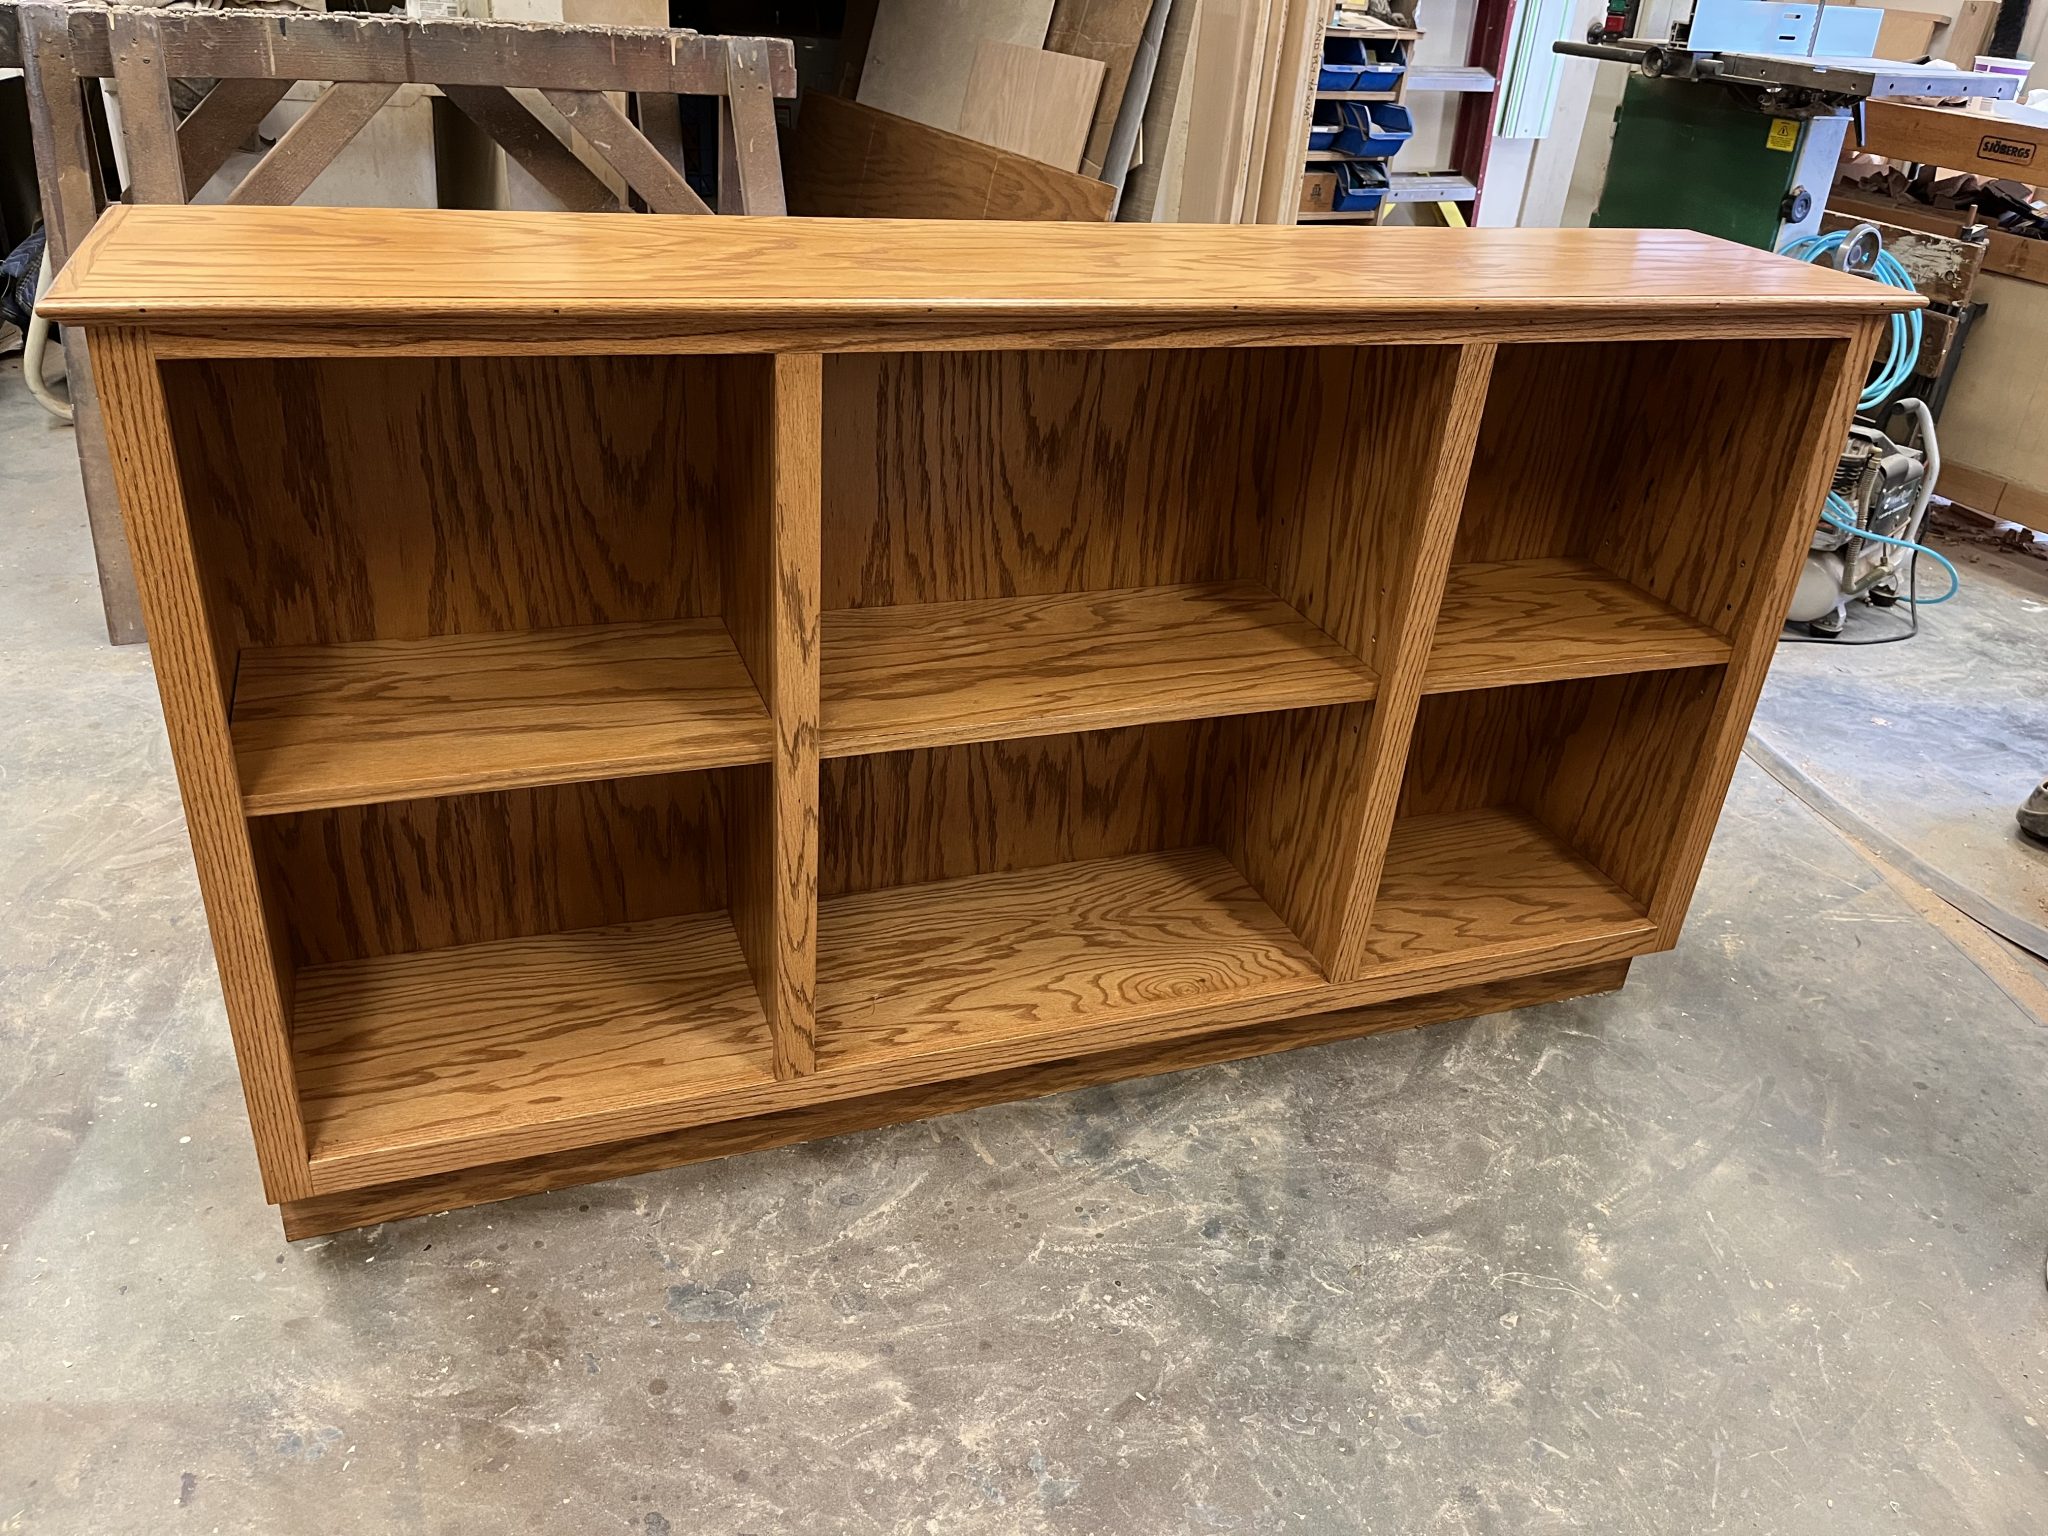 Bookcase with faceplate ends veneer.